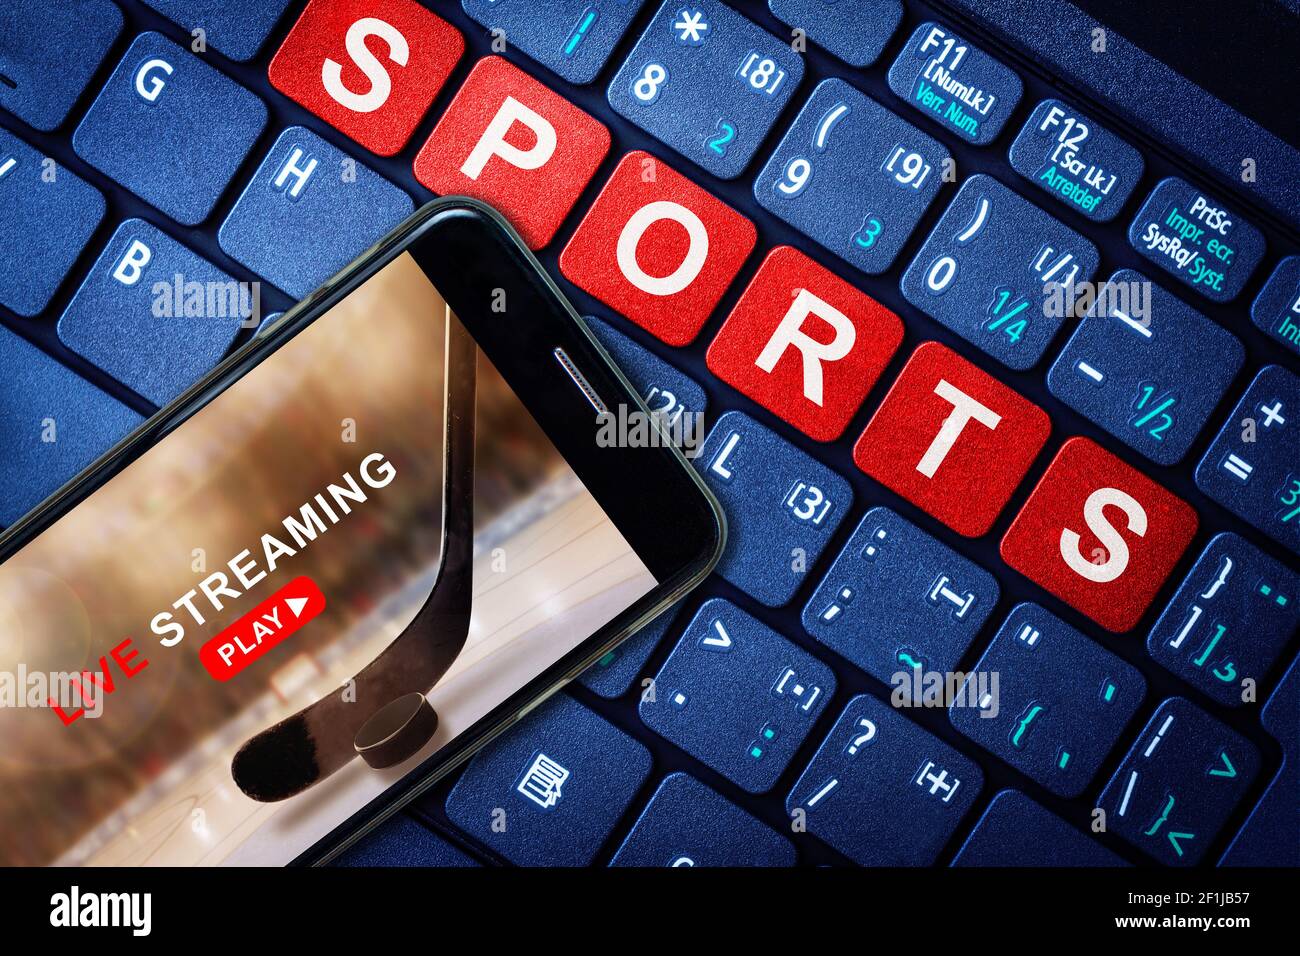 Sports Live streaming concept showing ice hockey game broadcast on smartphone with laptop high tech background